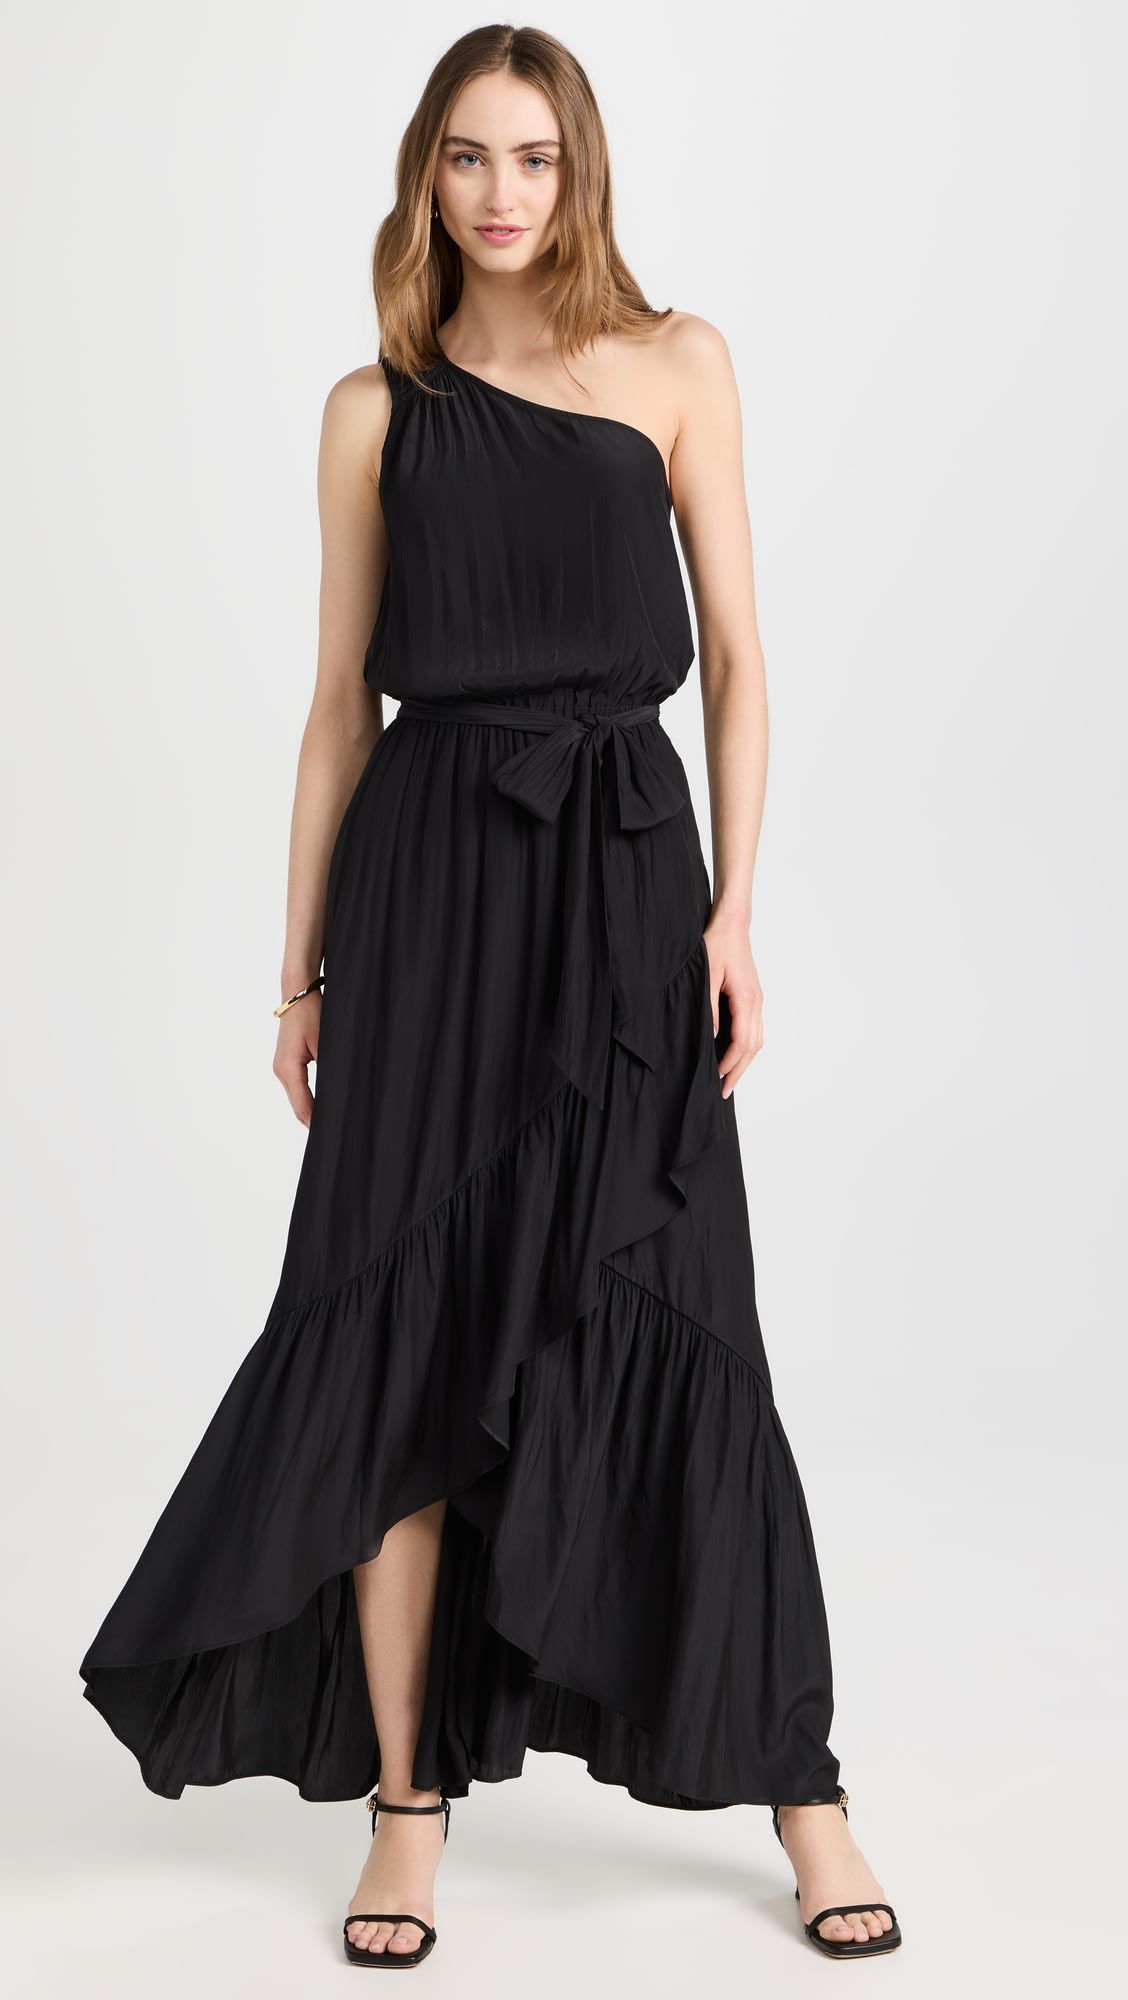 Stylish and Trendy Ruffle Dress: A Must-Have Fashion Item of the Season